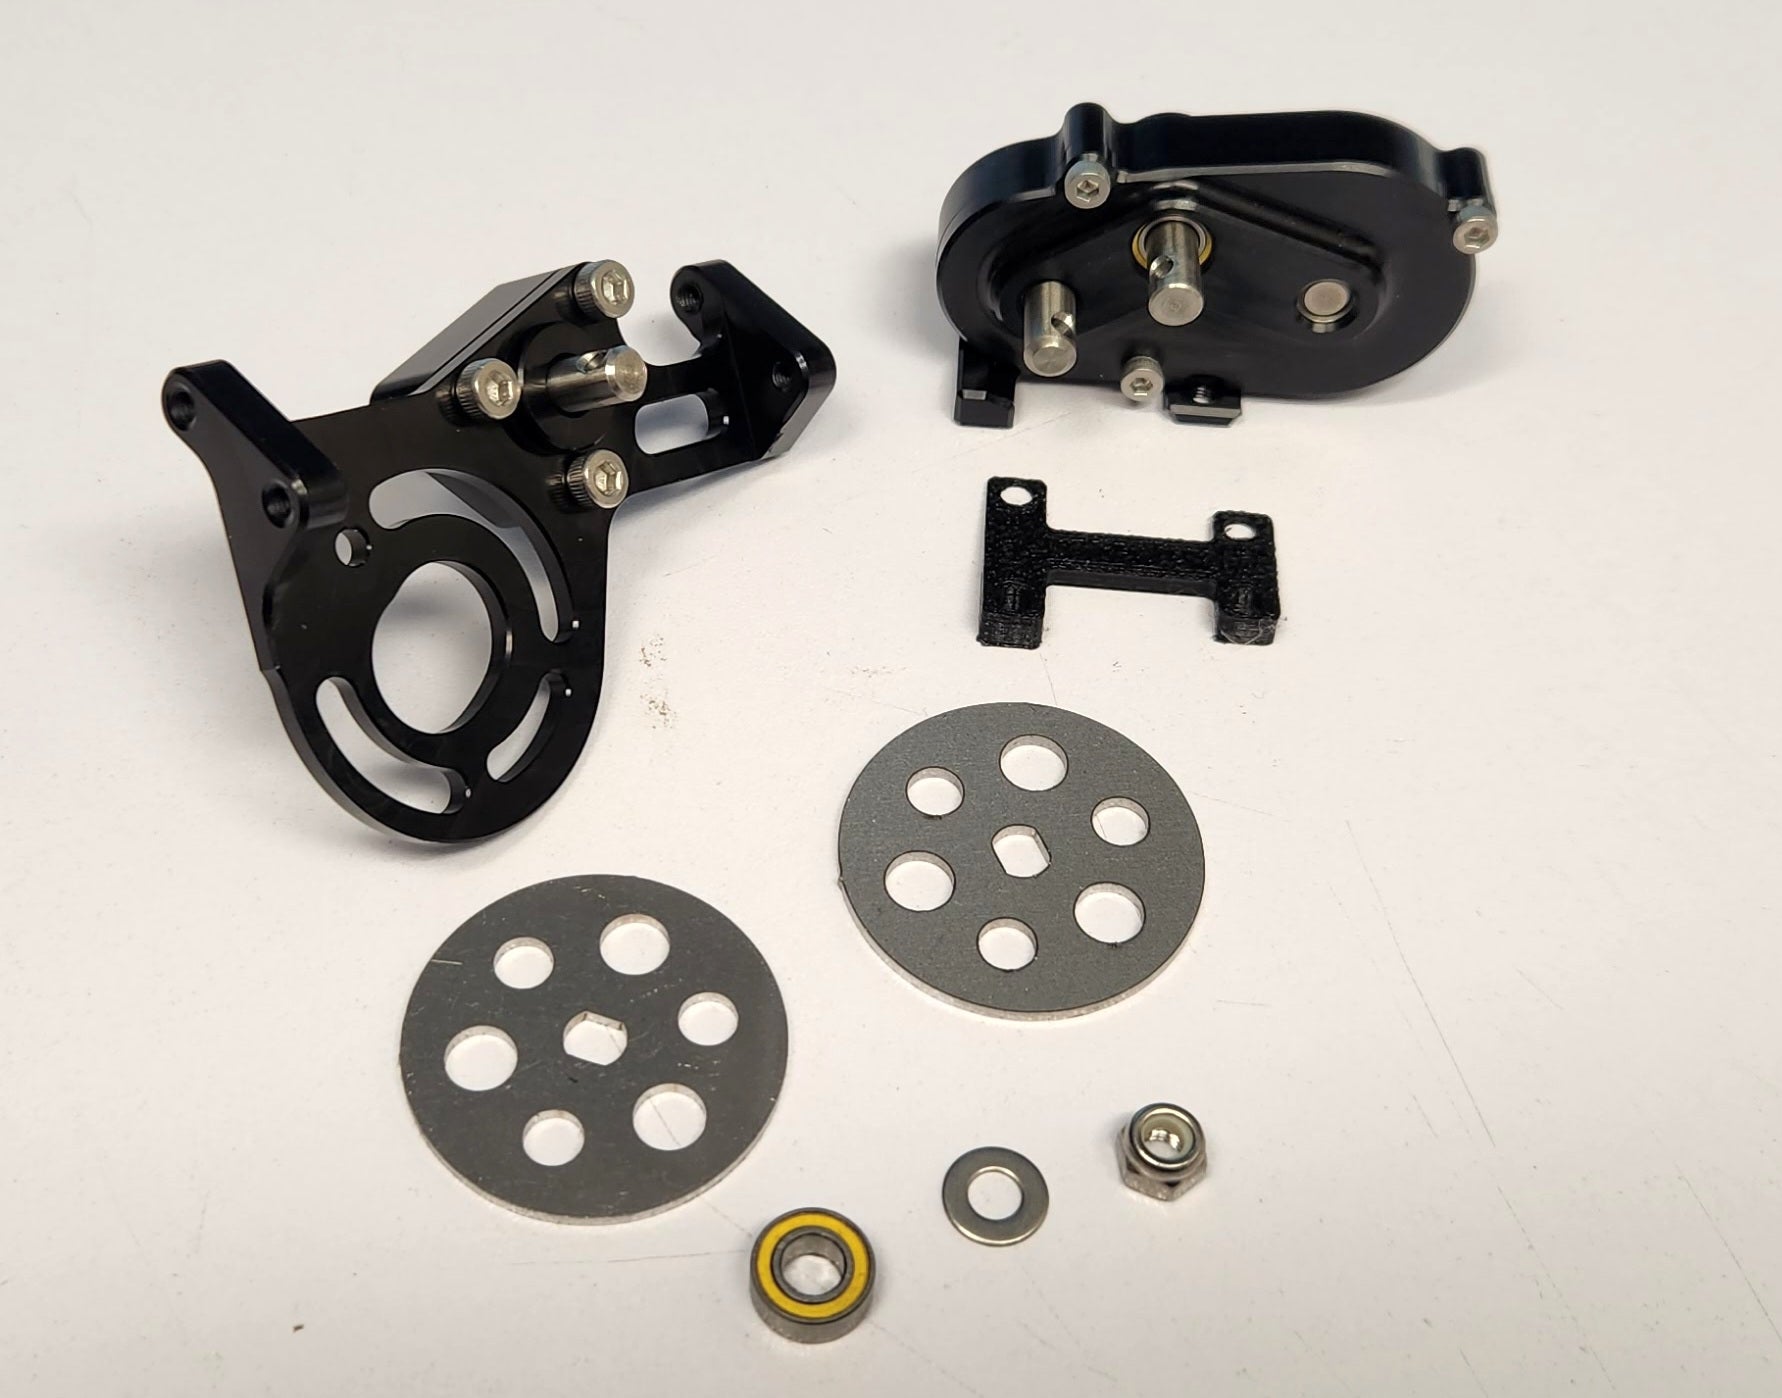 TGH Forward Motor Mount and 0% or 30% Overdrive Transfer Case package for the GS-V4 and V2-C1-FS Chassis